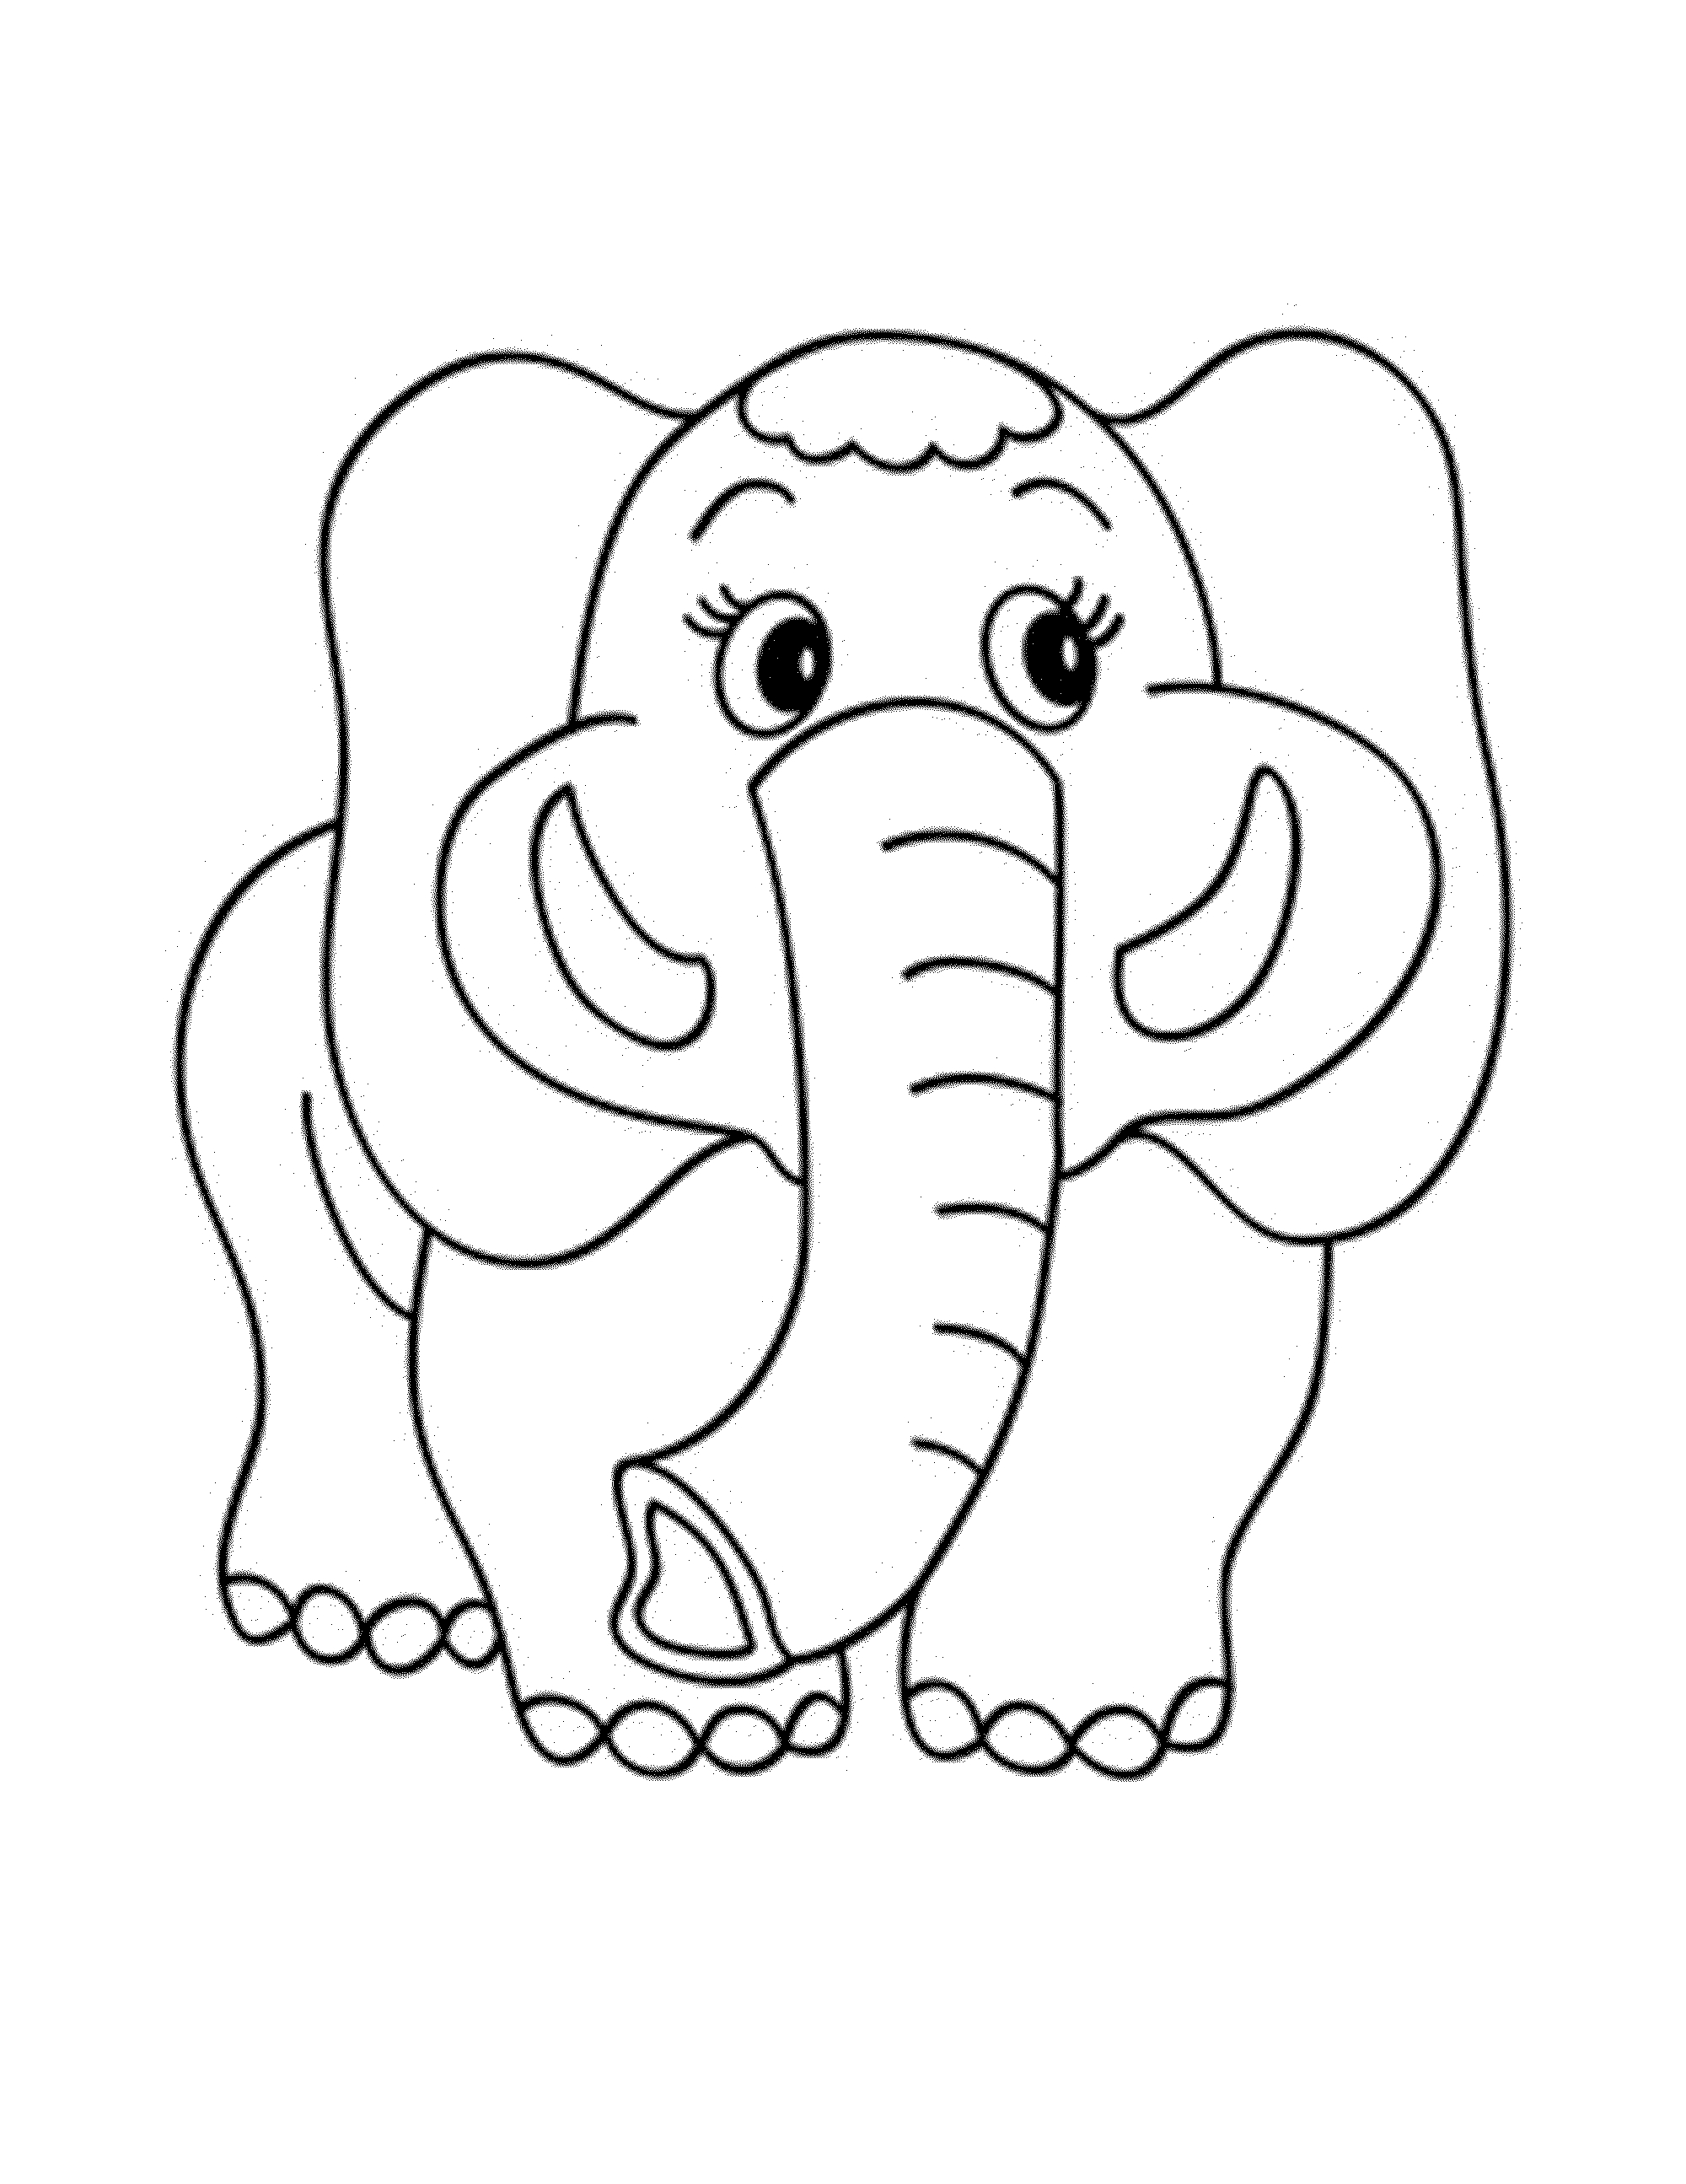 Baby Elephant Coloring Pages at GetColorings.com   Free printable ...